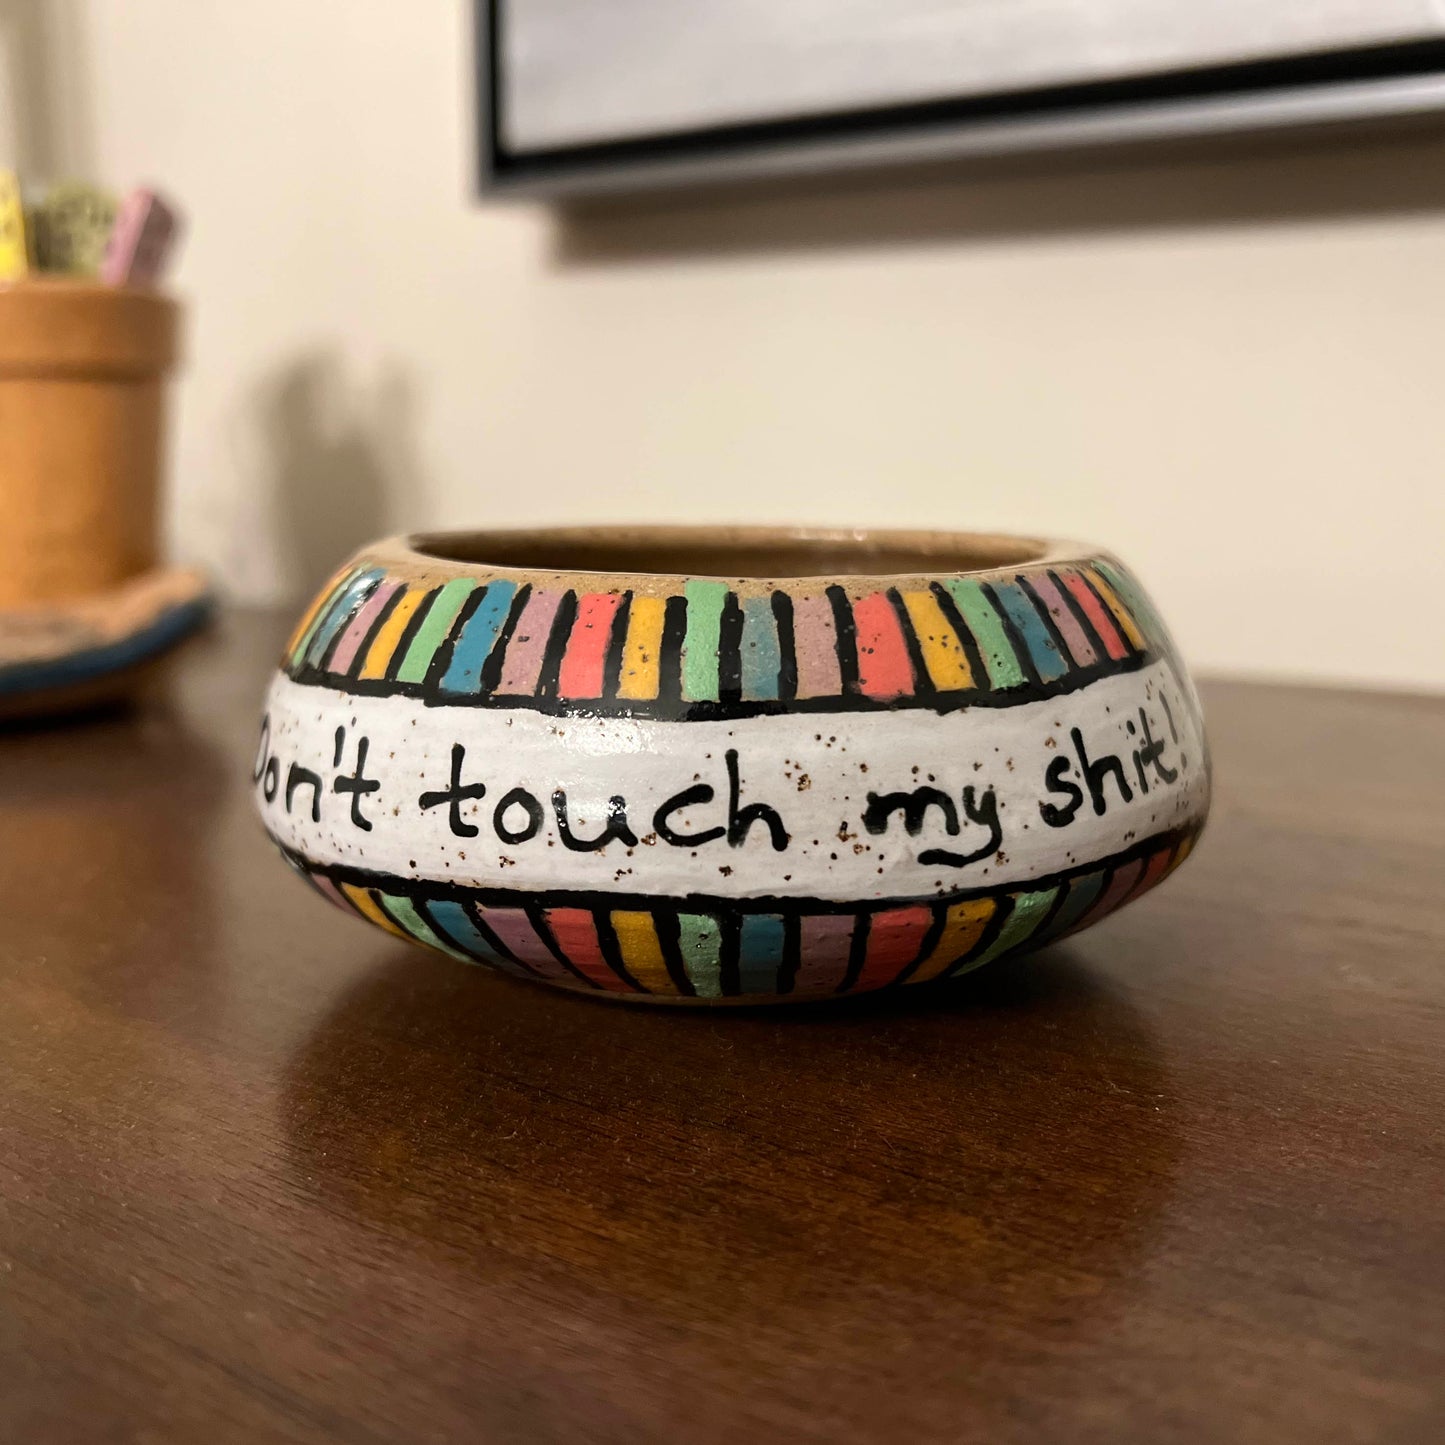 Don't Touch My Sh!t Ceramic Dish